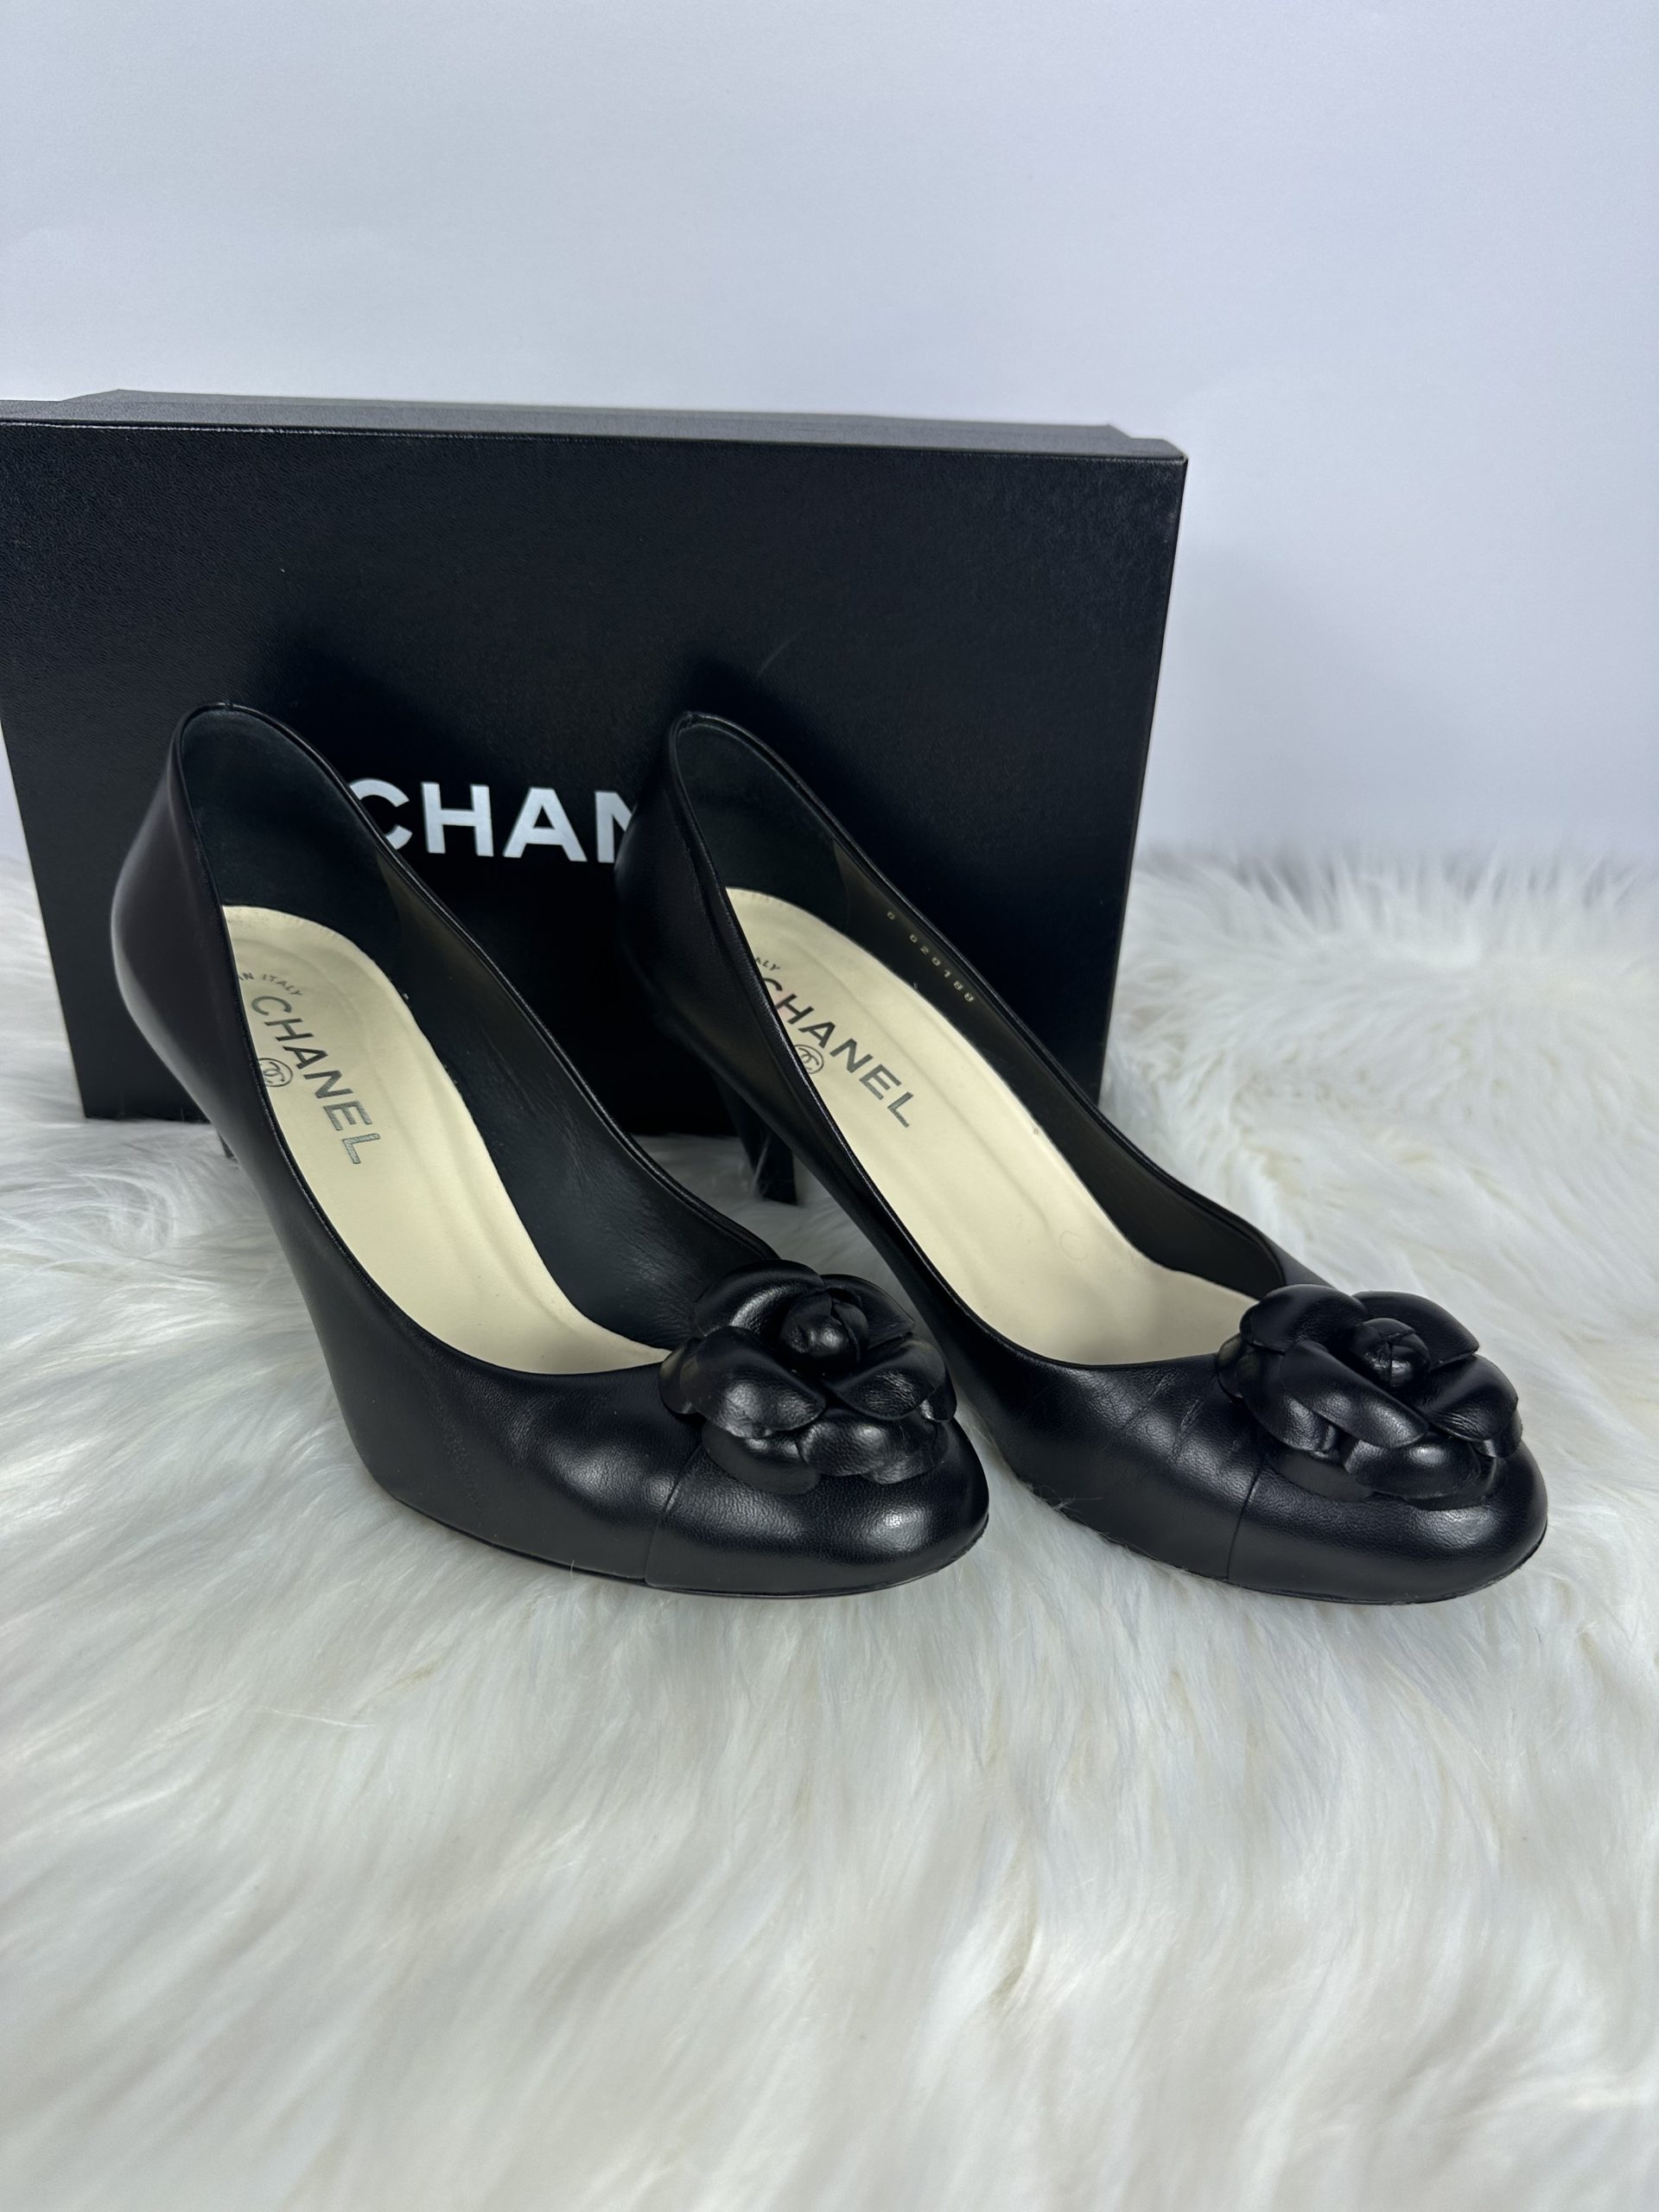 Authentic Chanel Black Solid Satin Shoes on sale at JHROP. Luxury Designer  Consignment Resale @jhrop_official